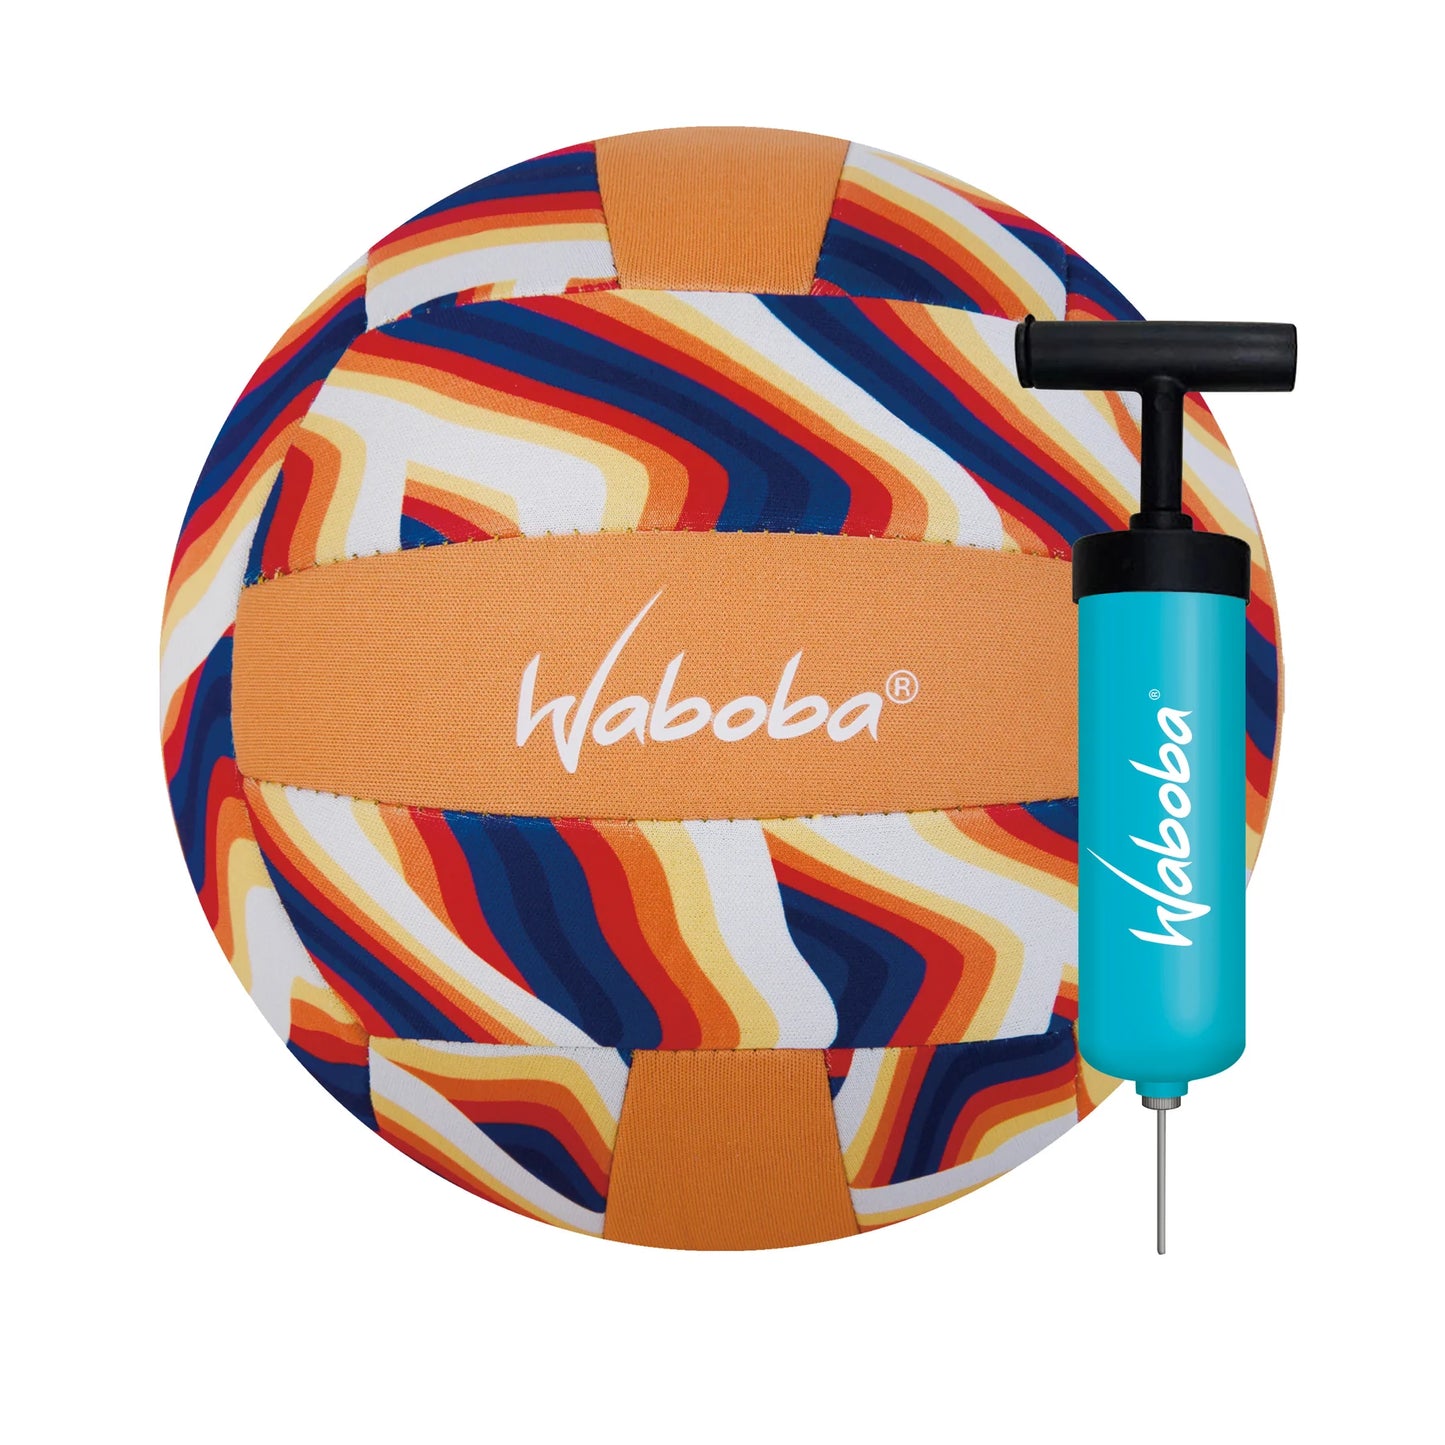 Waboba Beach Volley Ball with pump